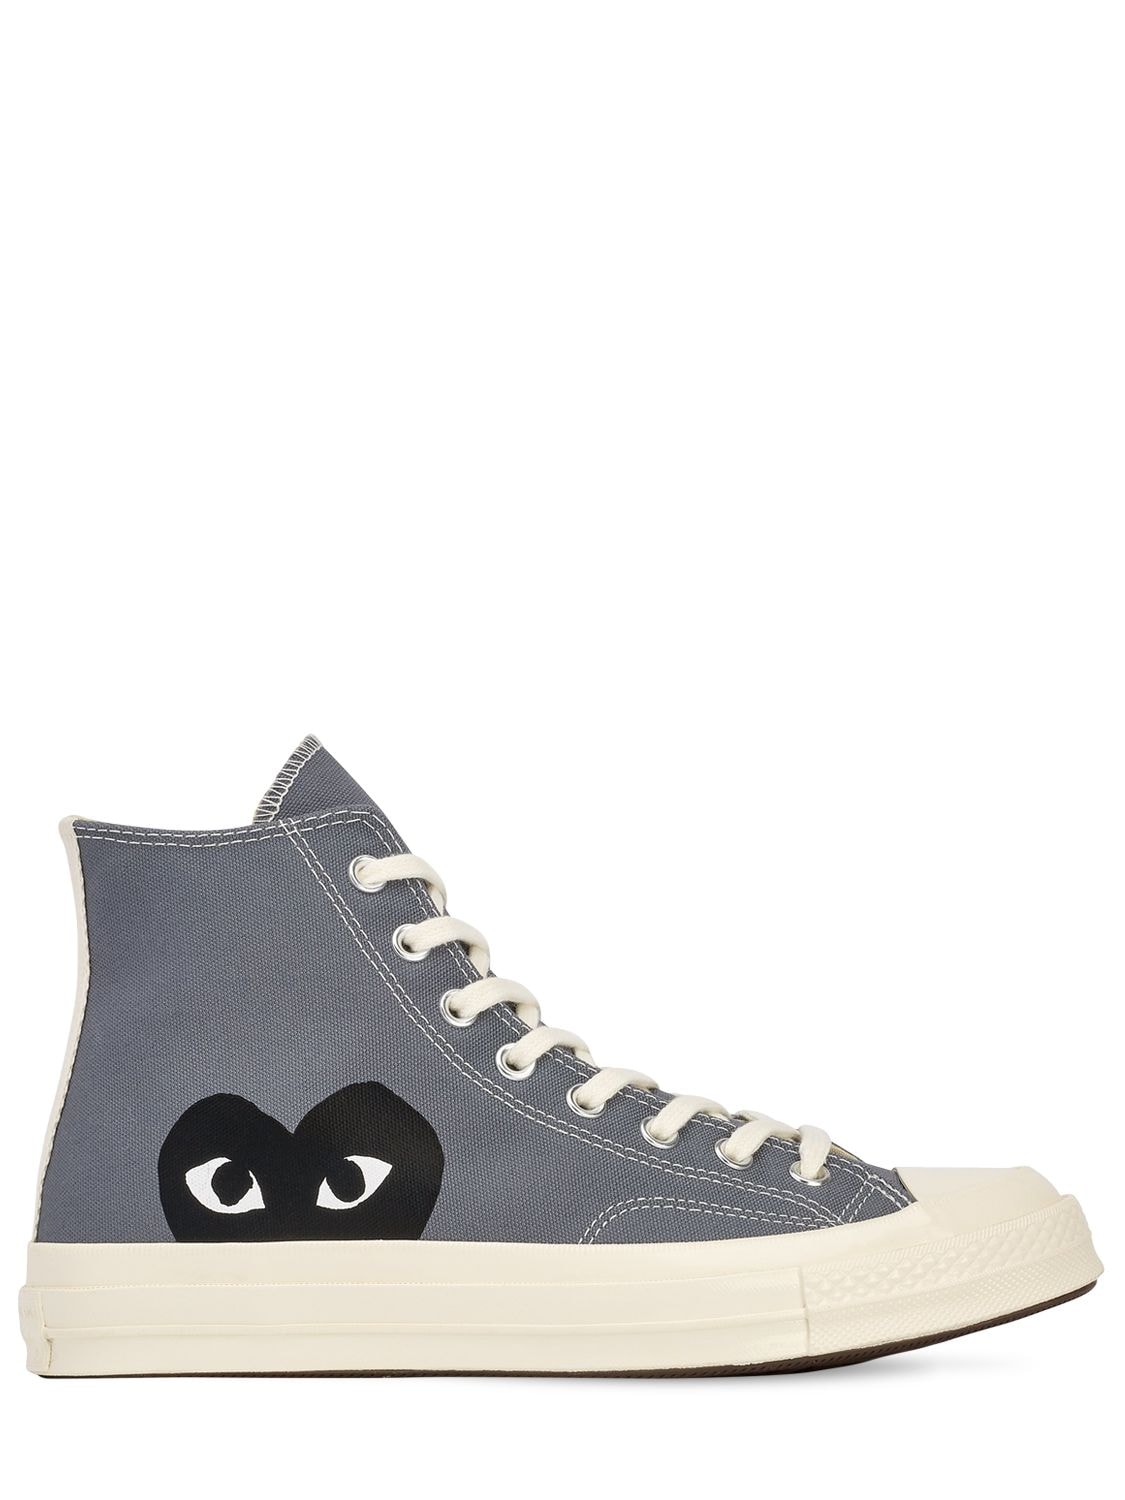 Comme Des Garçons Play 20mm Play Converse Cotton High Sneakers In Grey